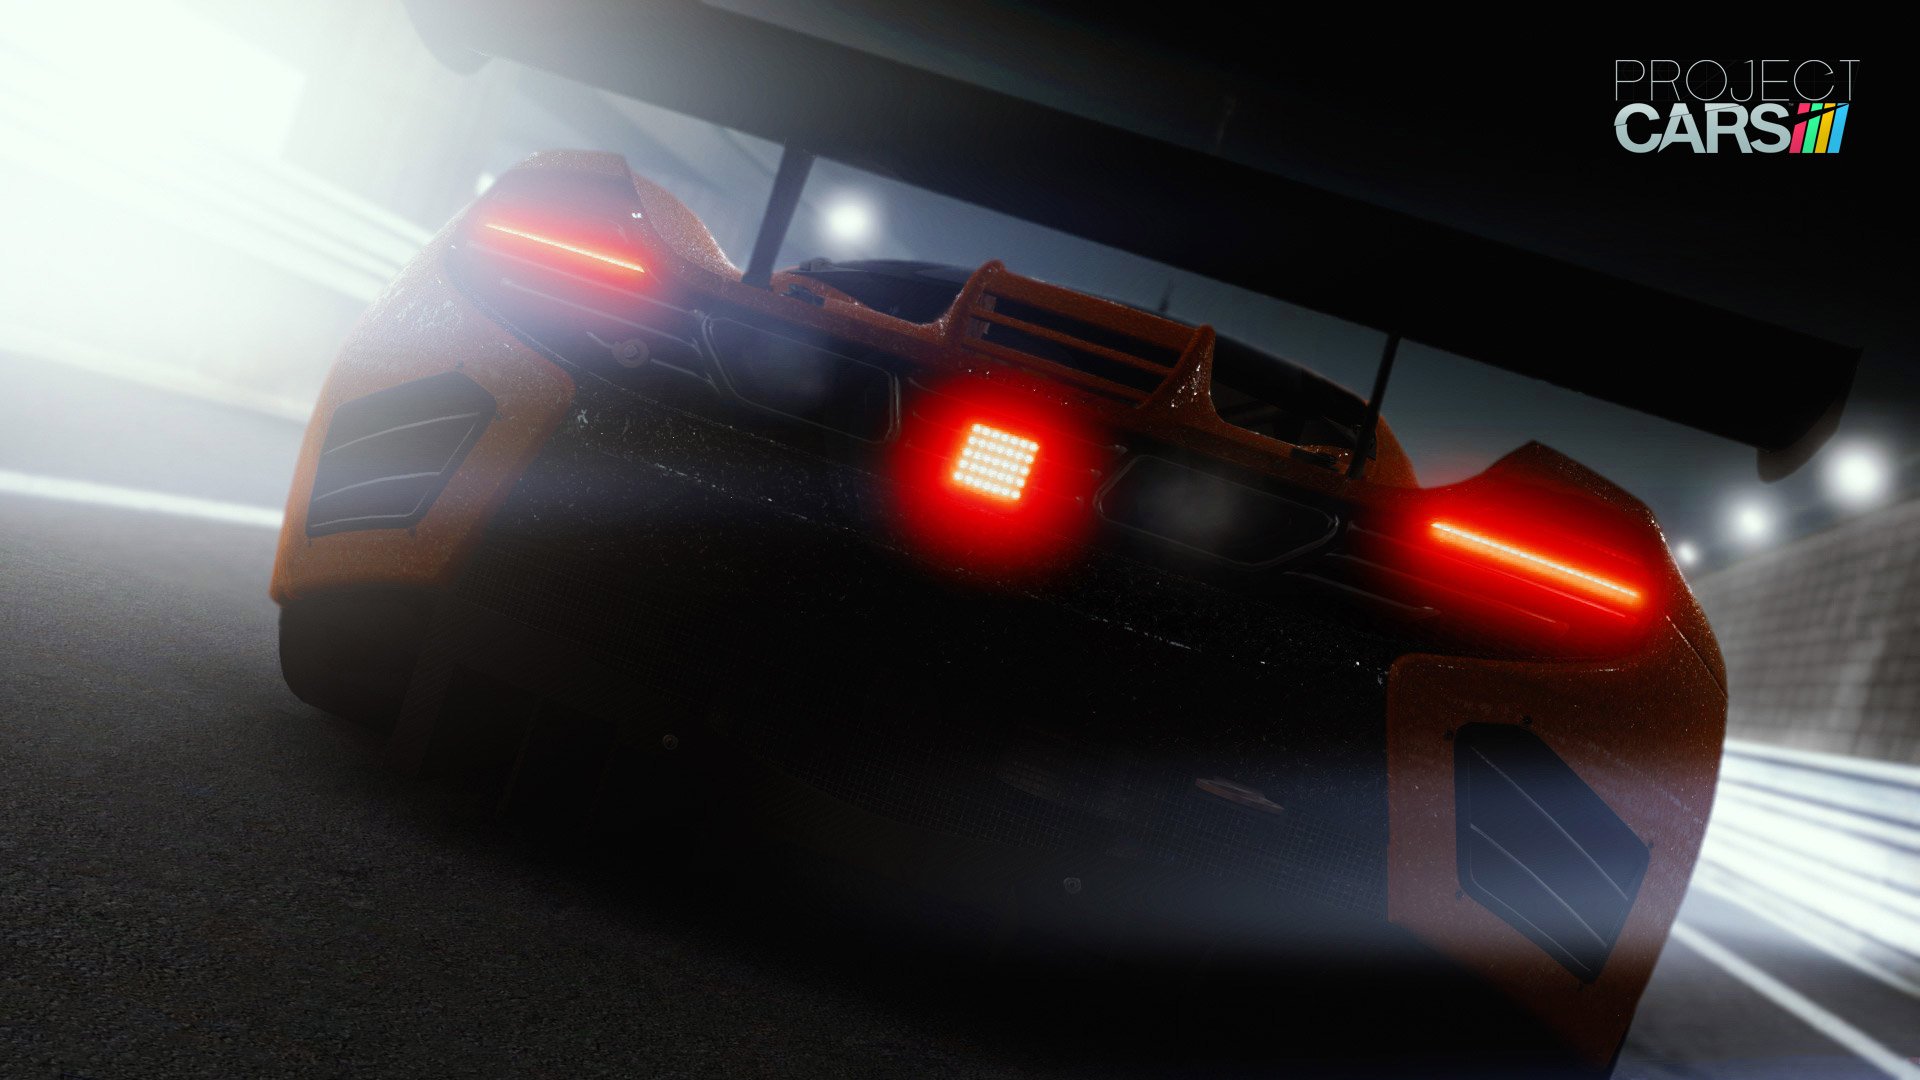 720p project cars background